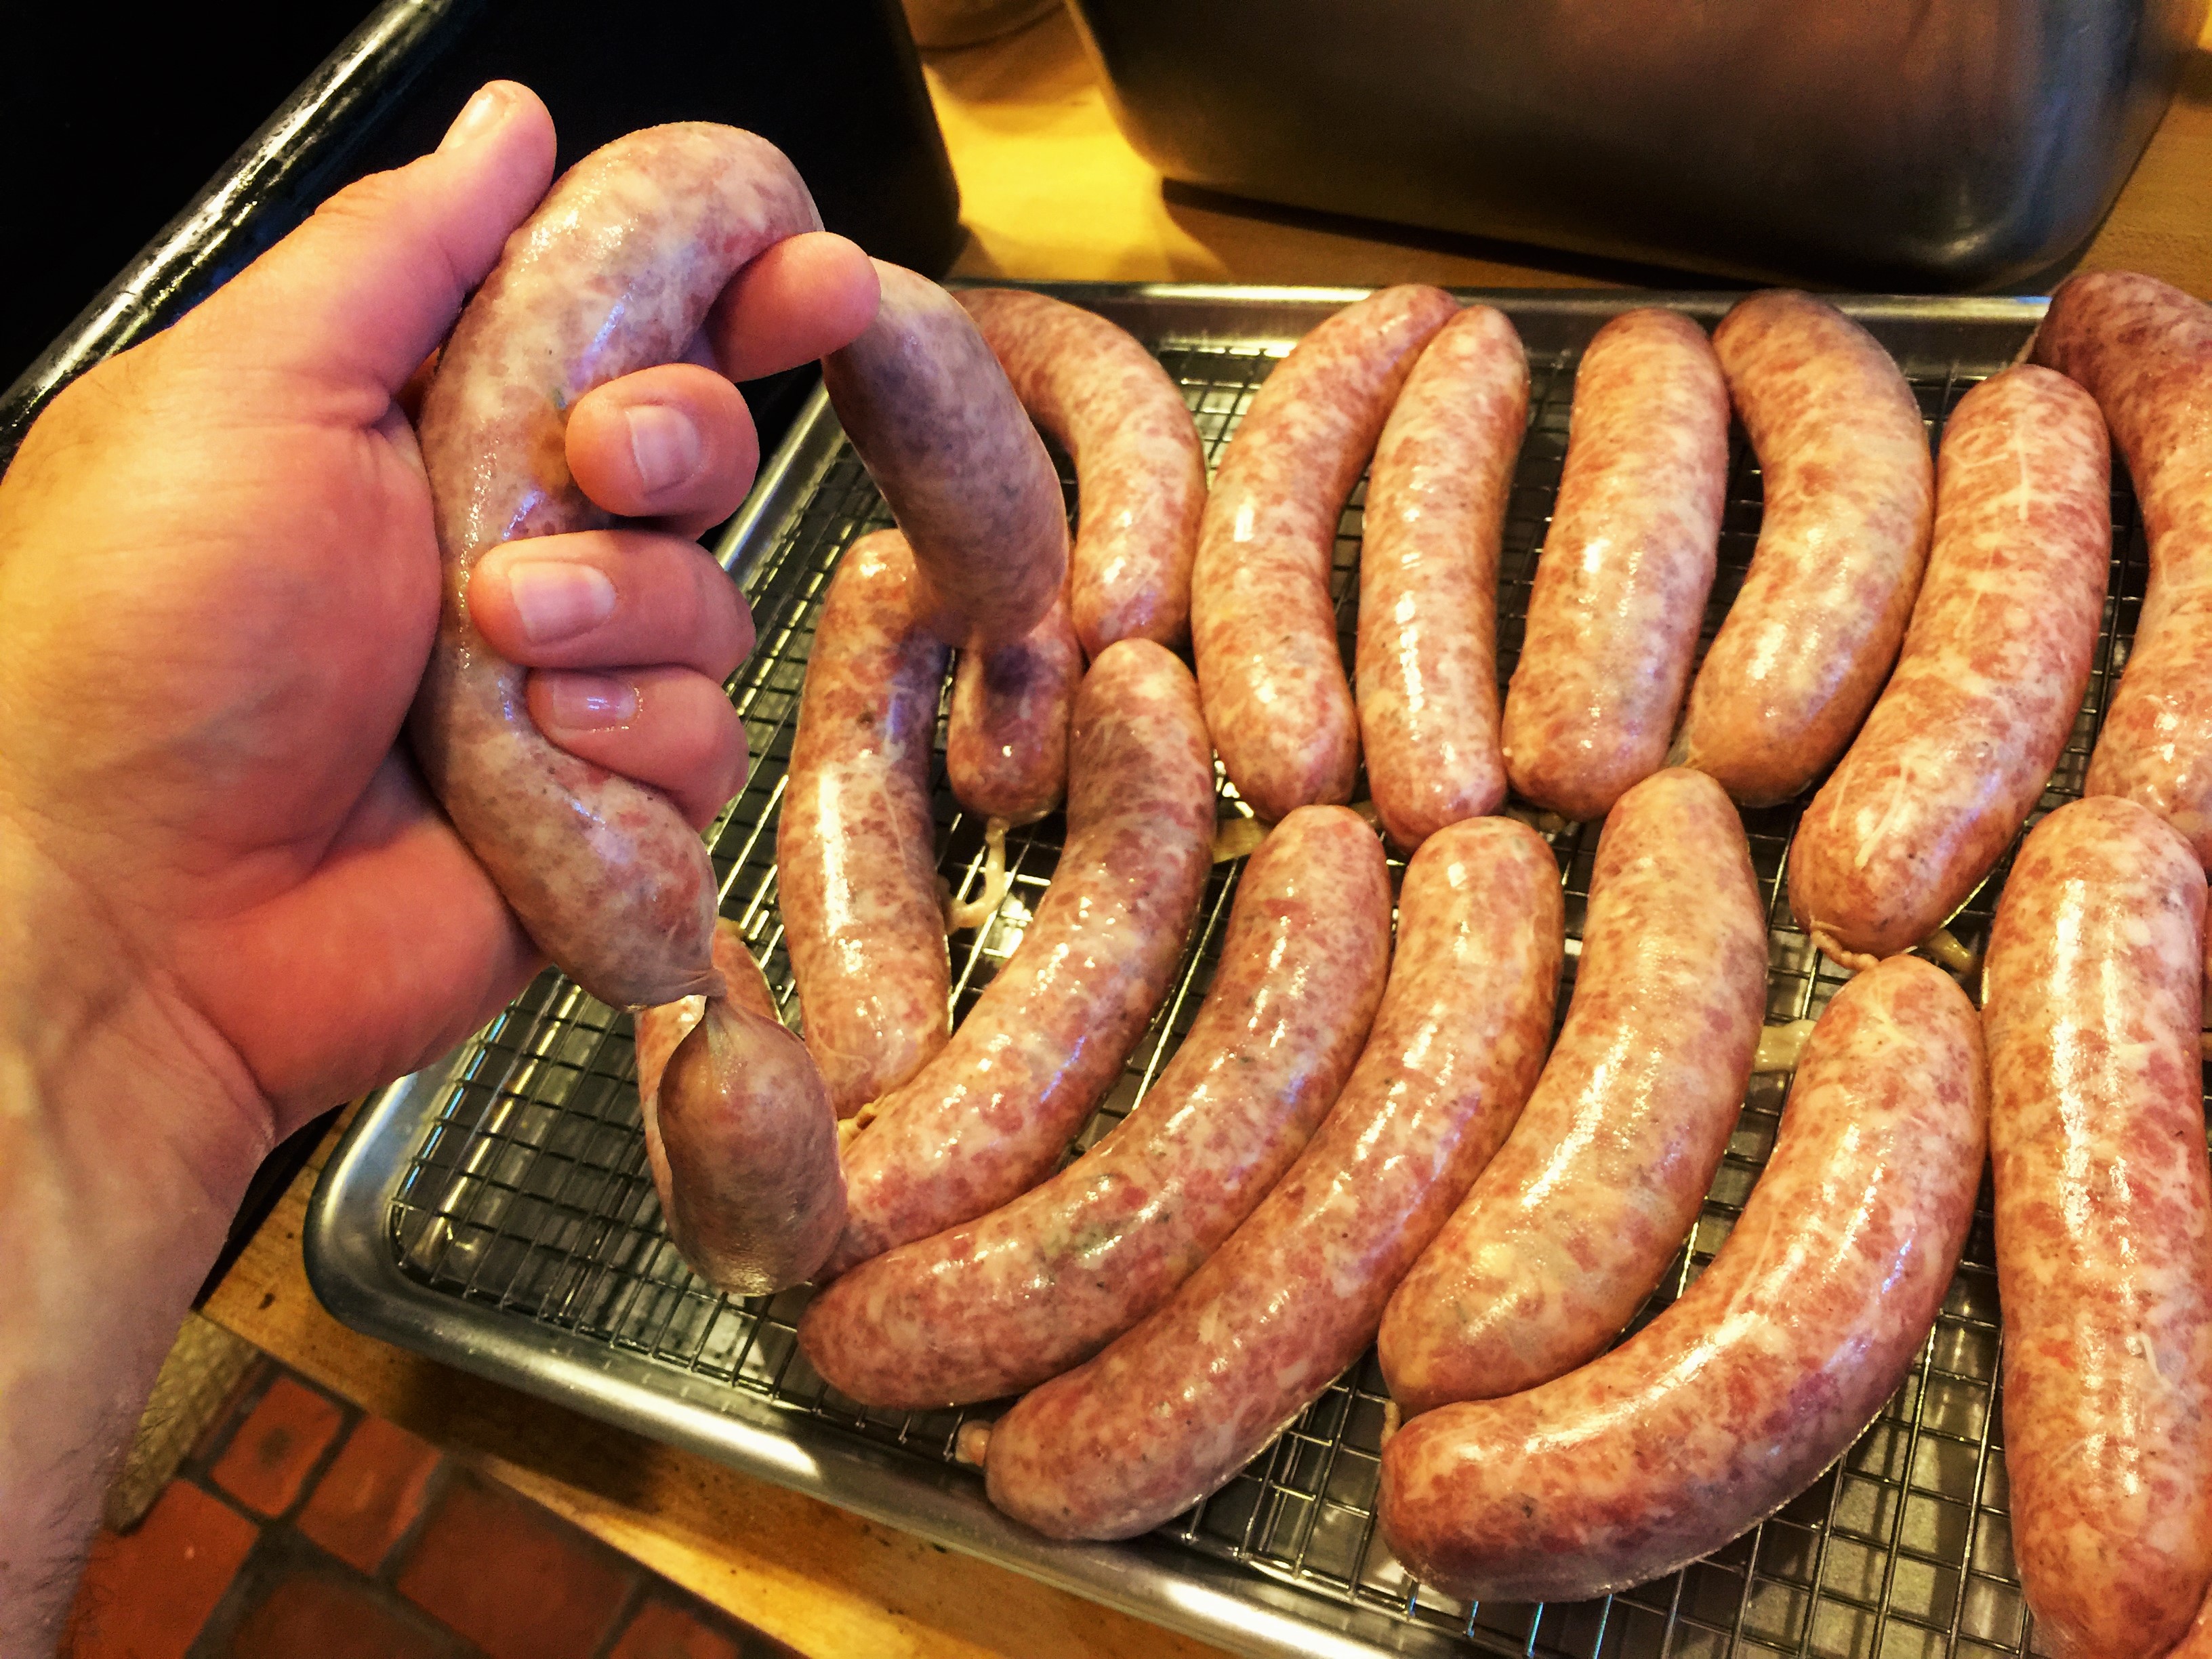 Hand cranking breakfast sausages in the kitchen of the Old Caledonian B&B